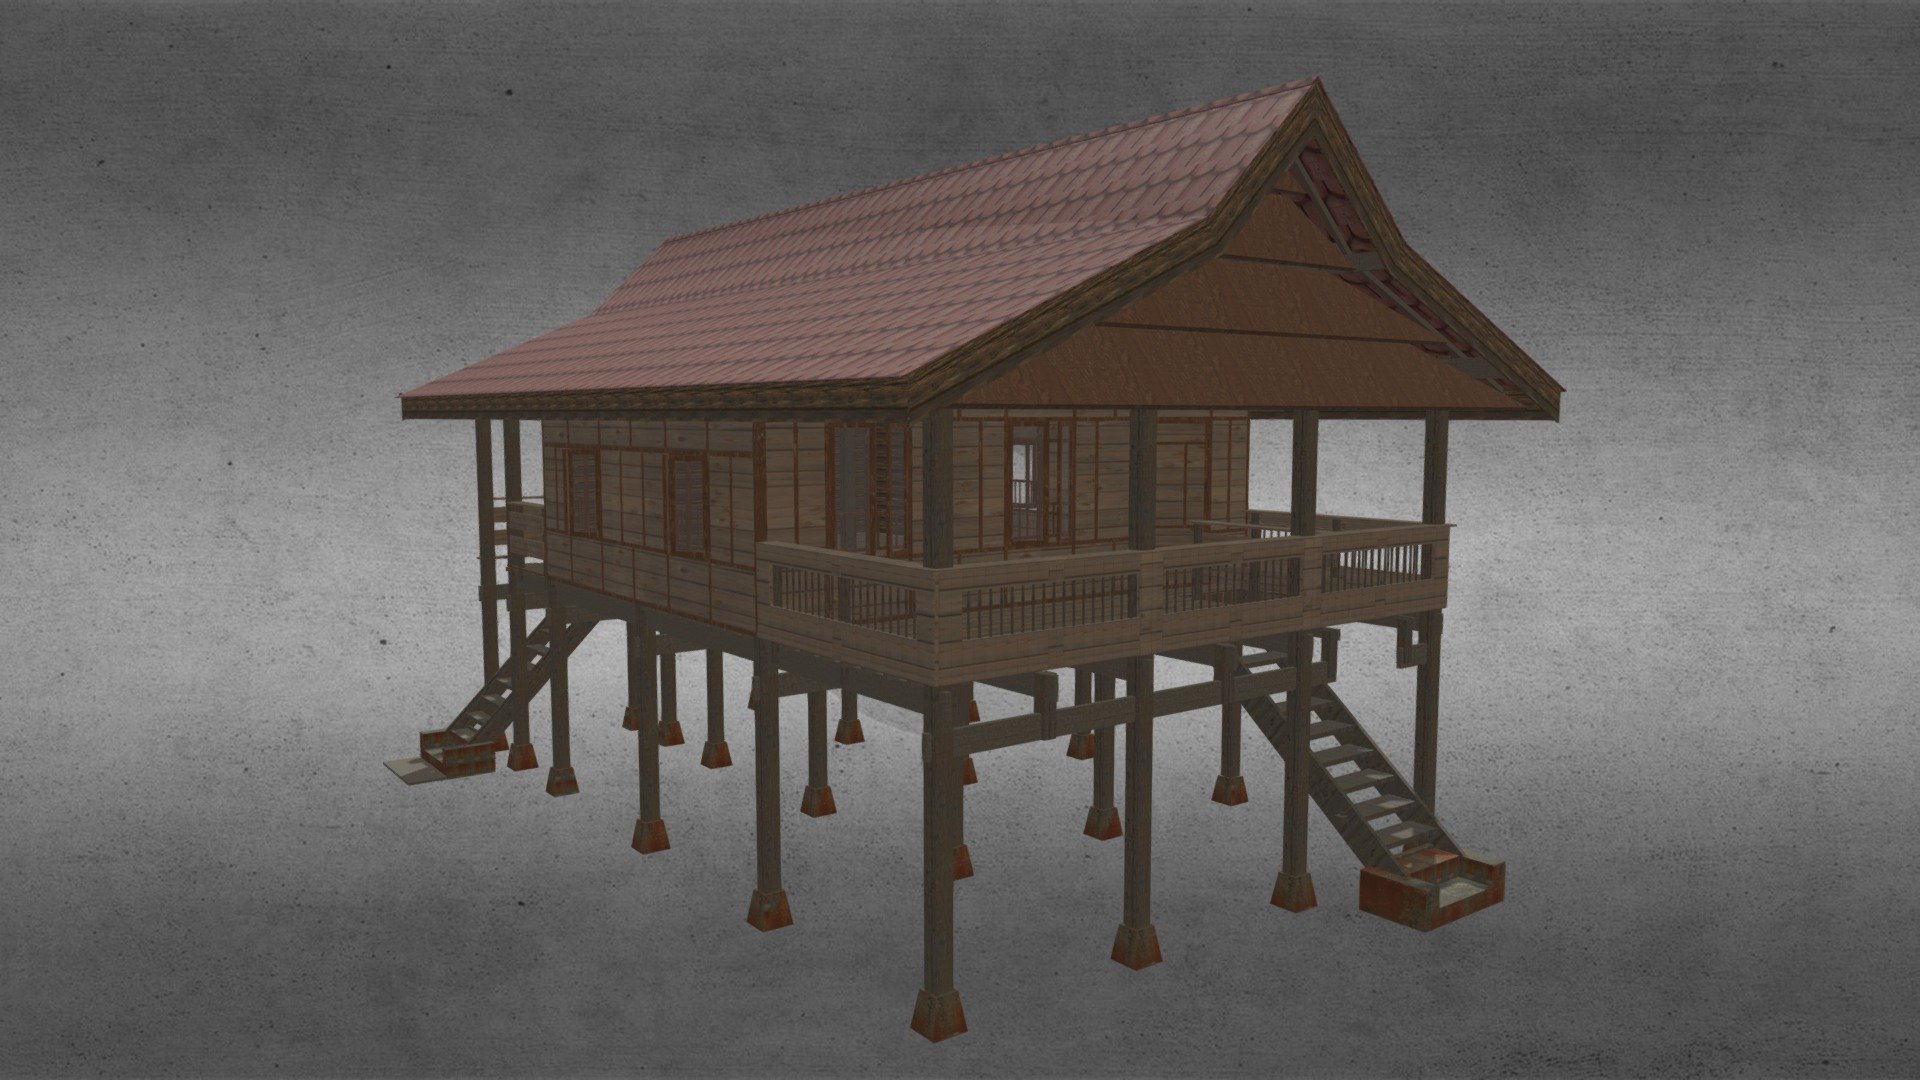 One of model of Rumah adat or Traditional House of Bugis ethnics in celebes island, Indonesia 3d model